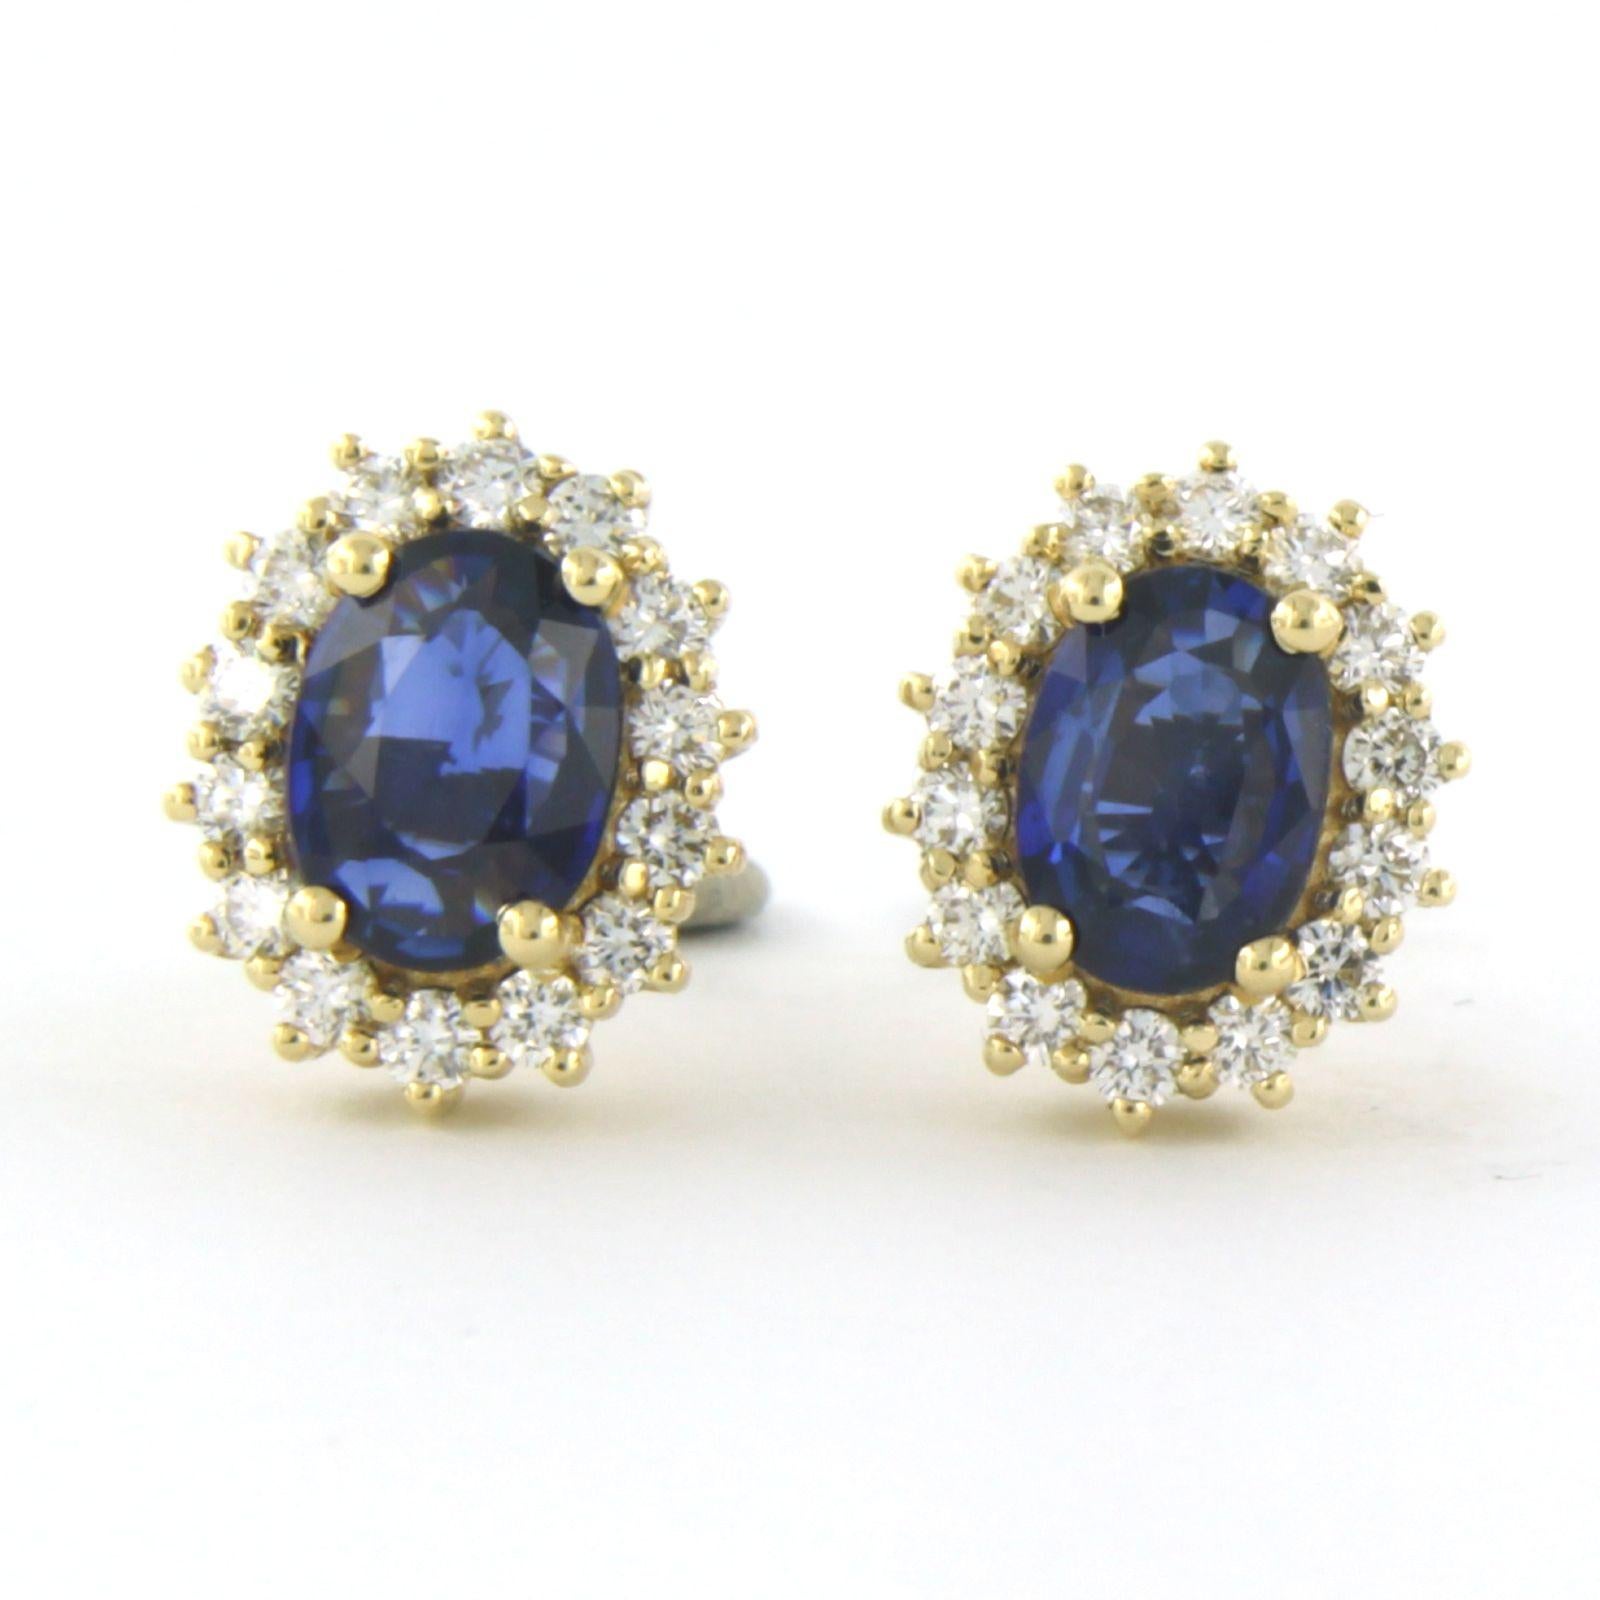 18k yellow gold cluster ear studs set with central sapphire to. 1.76ct and around it brilliant cut diamond up to. 0.50ct - F/G - VS/SI

detailed description:

The front of the ear stud is in an oval shape of 1.1 cm high and 9.3 mm wide

weight: 4.4